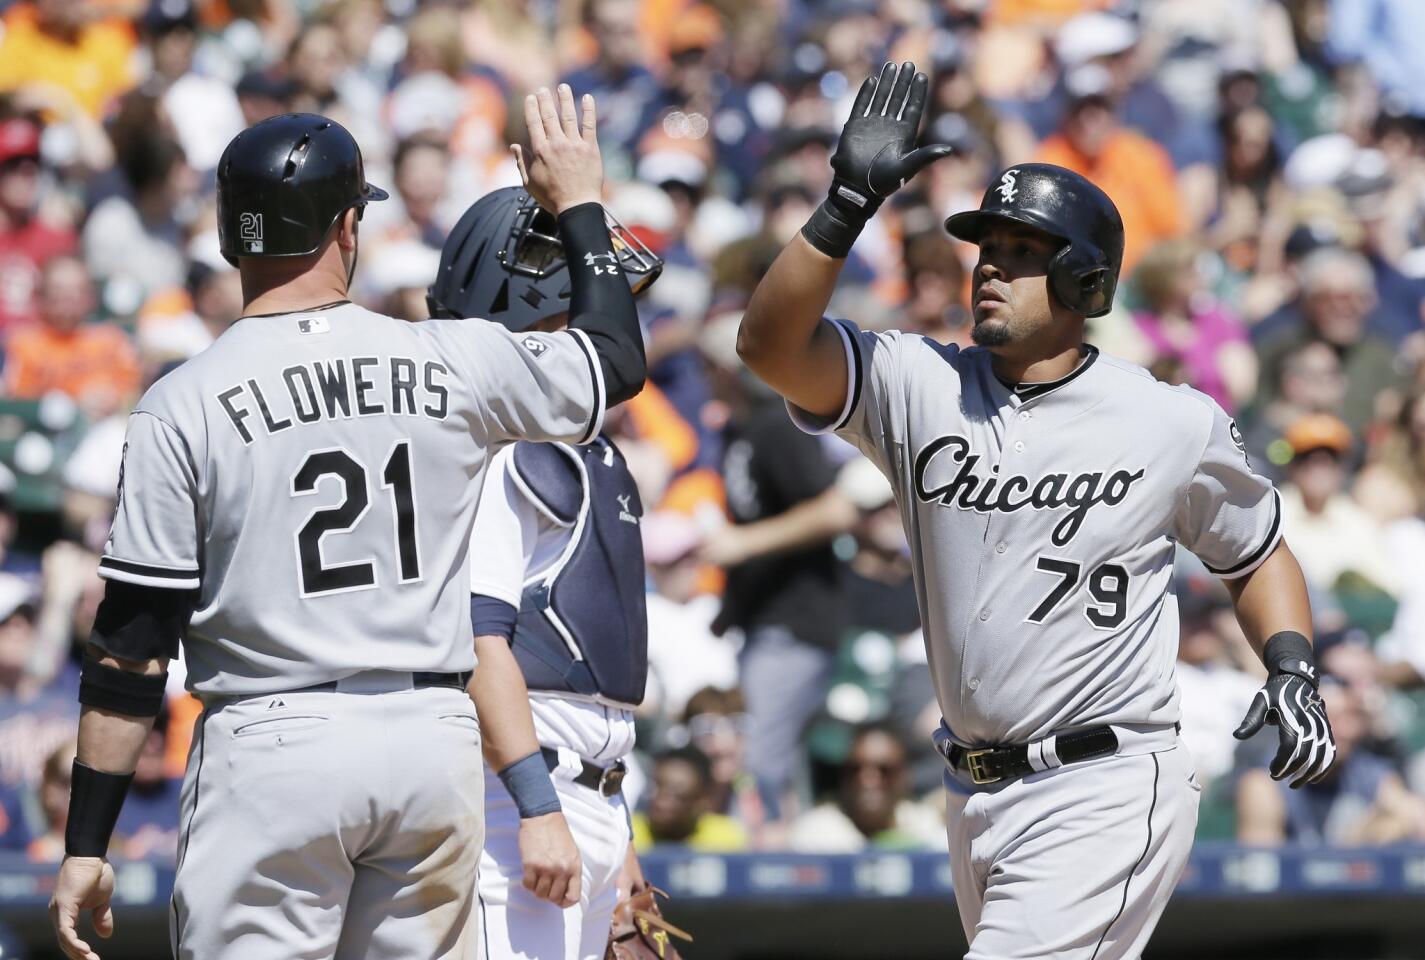 Jose Abreu greets Tyler Flowers after Abreu's grand slam during the fourth inning.